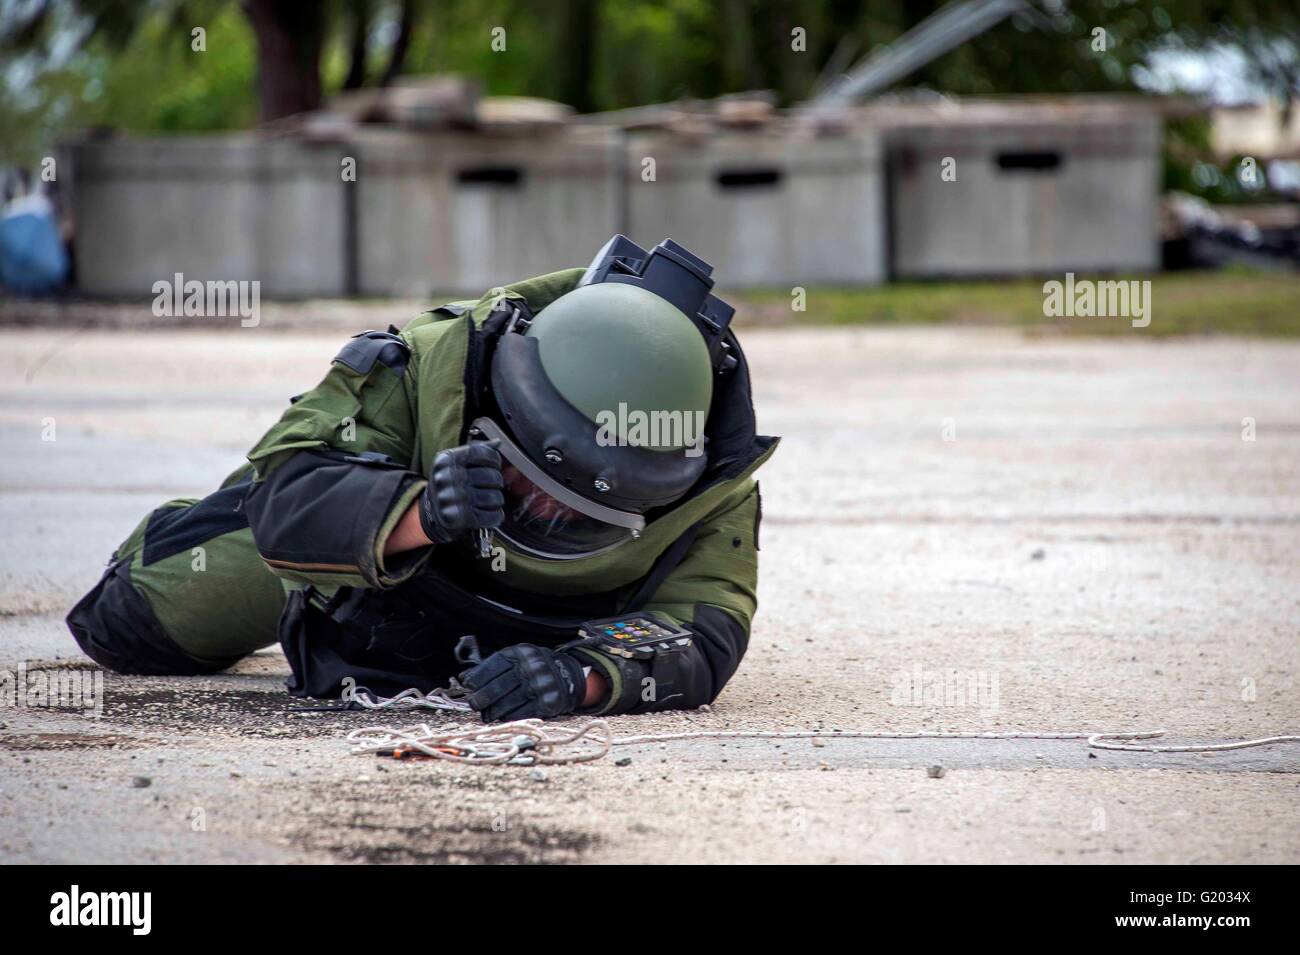 A Canadian Explosive Ordnance Disposal technician prepares to inspect an Improvised Explosive Device during a training scenario as part of Exercise Tricrab on Naval Base Guam May 18, 2016 in Guam. Tricrab is a combined exercise involving military forces from five different countries in the Asia-Pacific region. Stock Photo